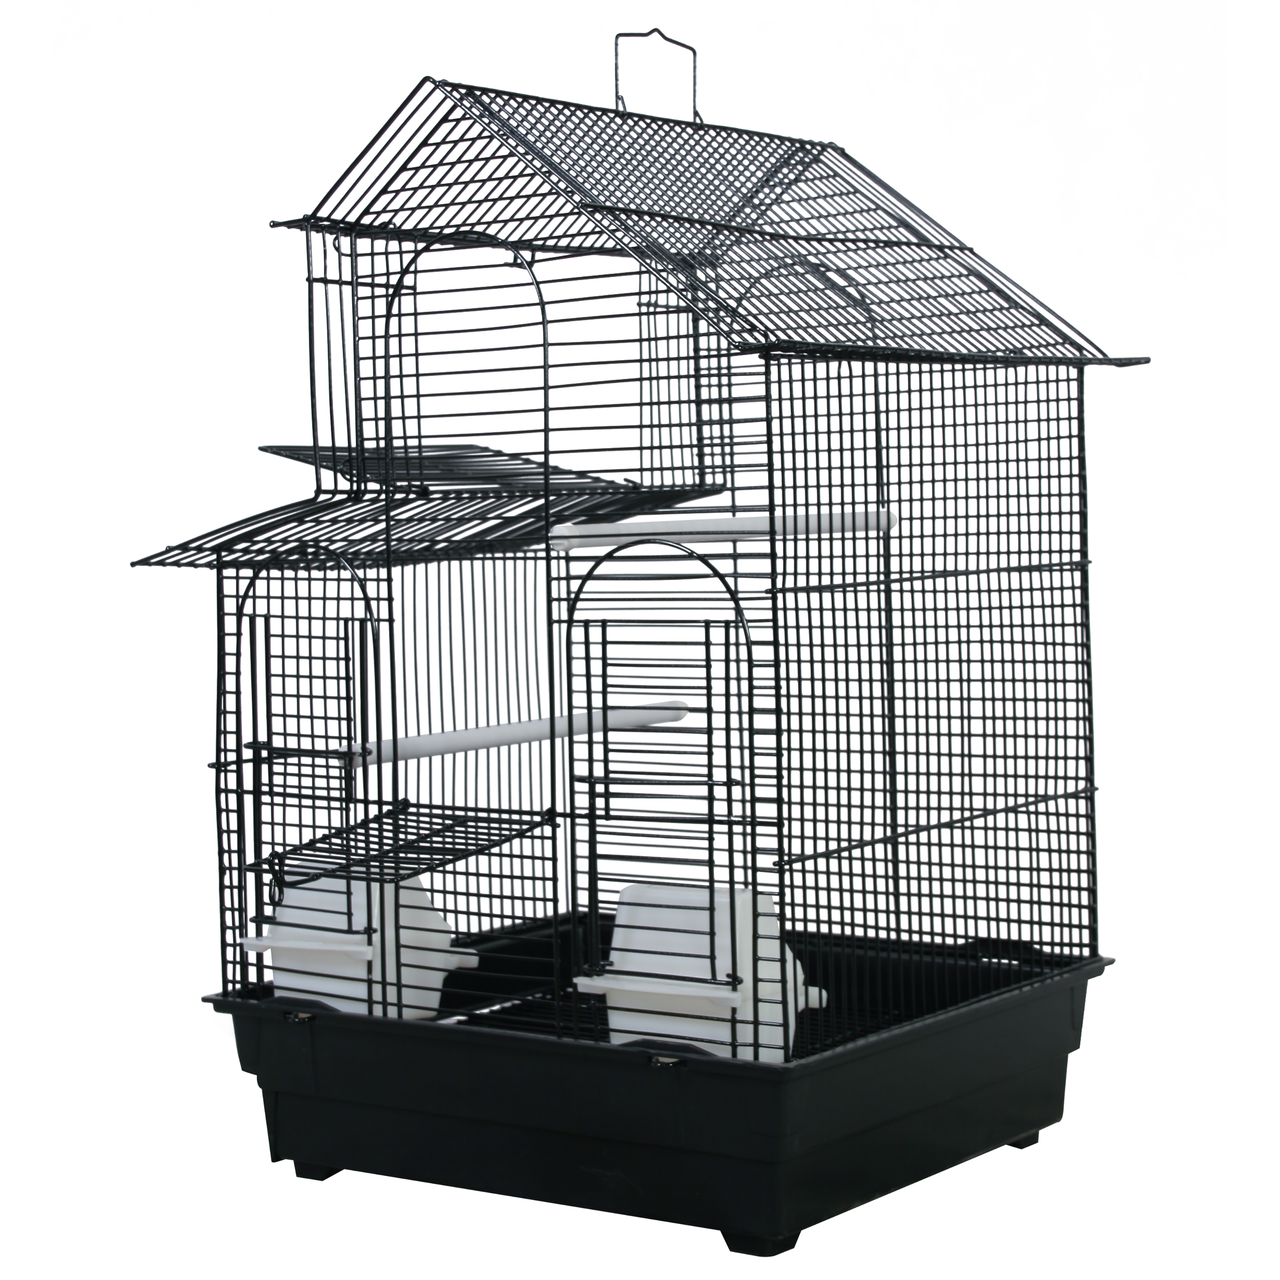 A & E Cages House Top Bird Cage in Retail Box 16 Inches X 14 Inches